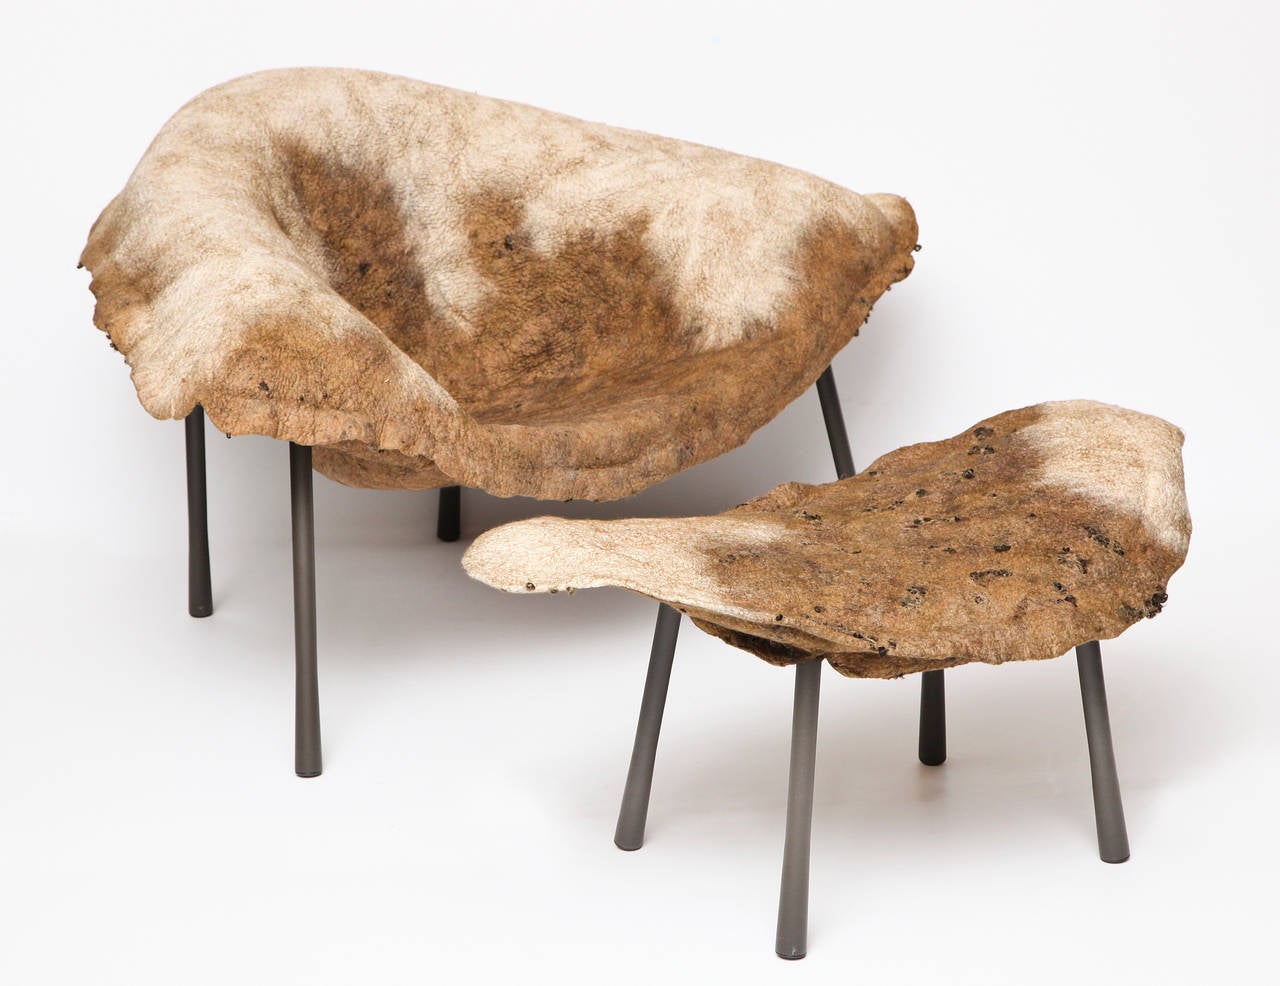 Akka Leh I.

Armchair and footrest in handcrafted wool and silk felt by Ayala Serfaty.

Footrest dimensions: Height: 18